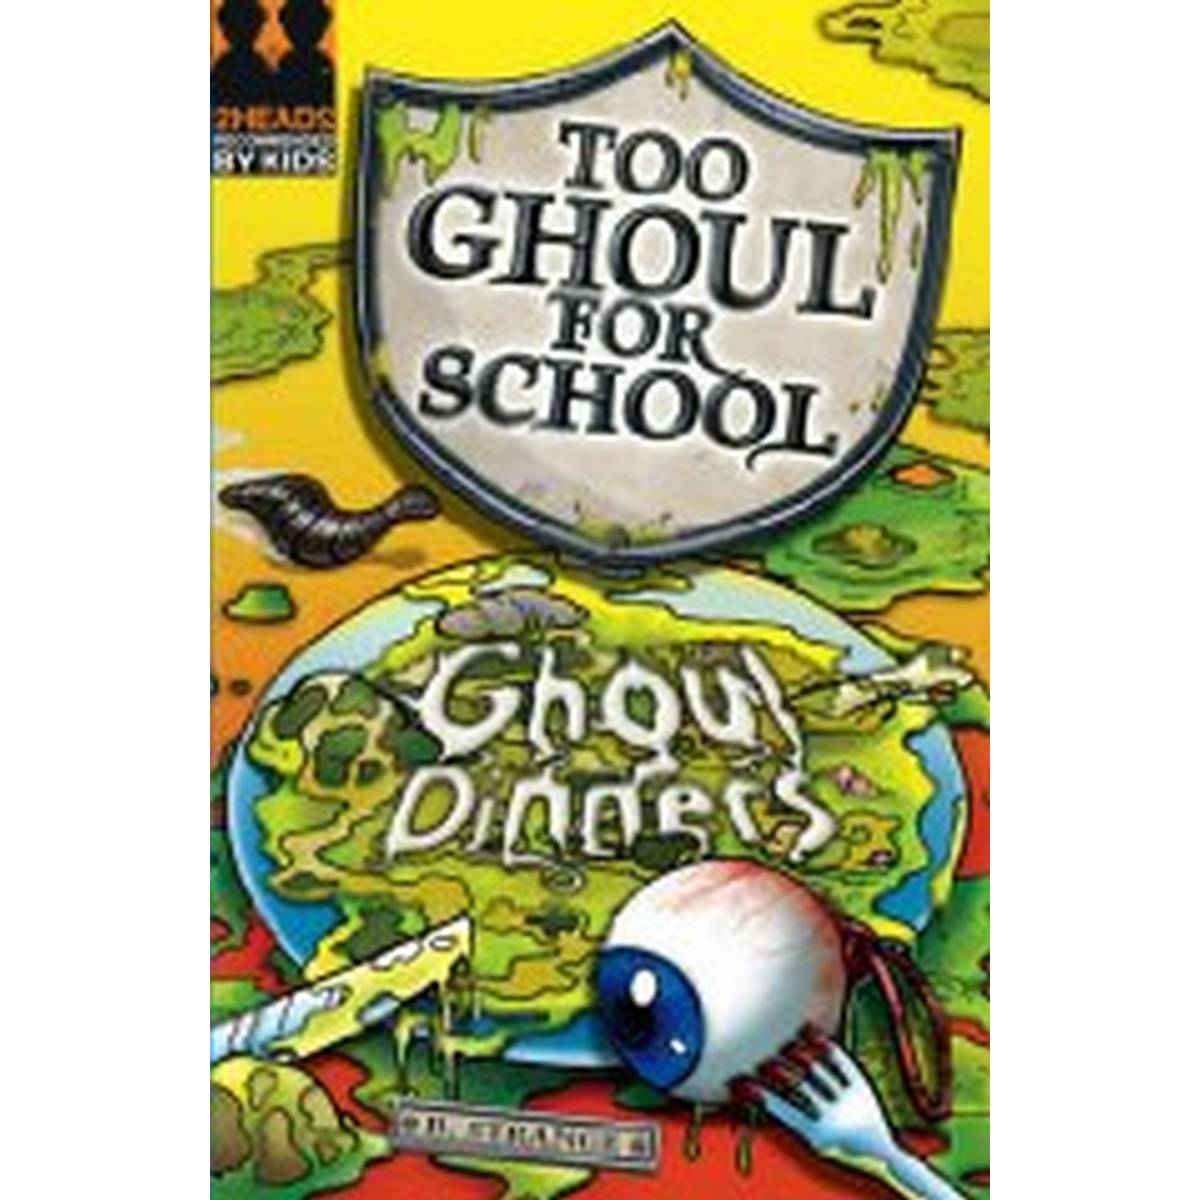 Ghoul Dinners (Too Ghoul for School)